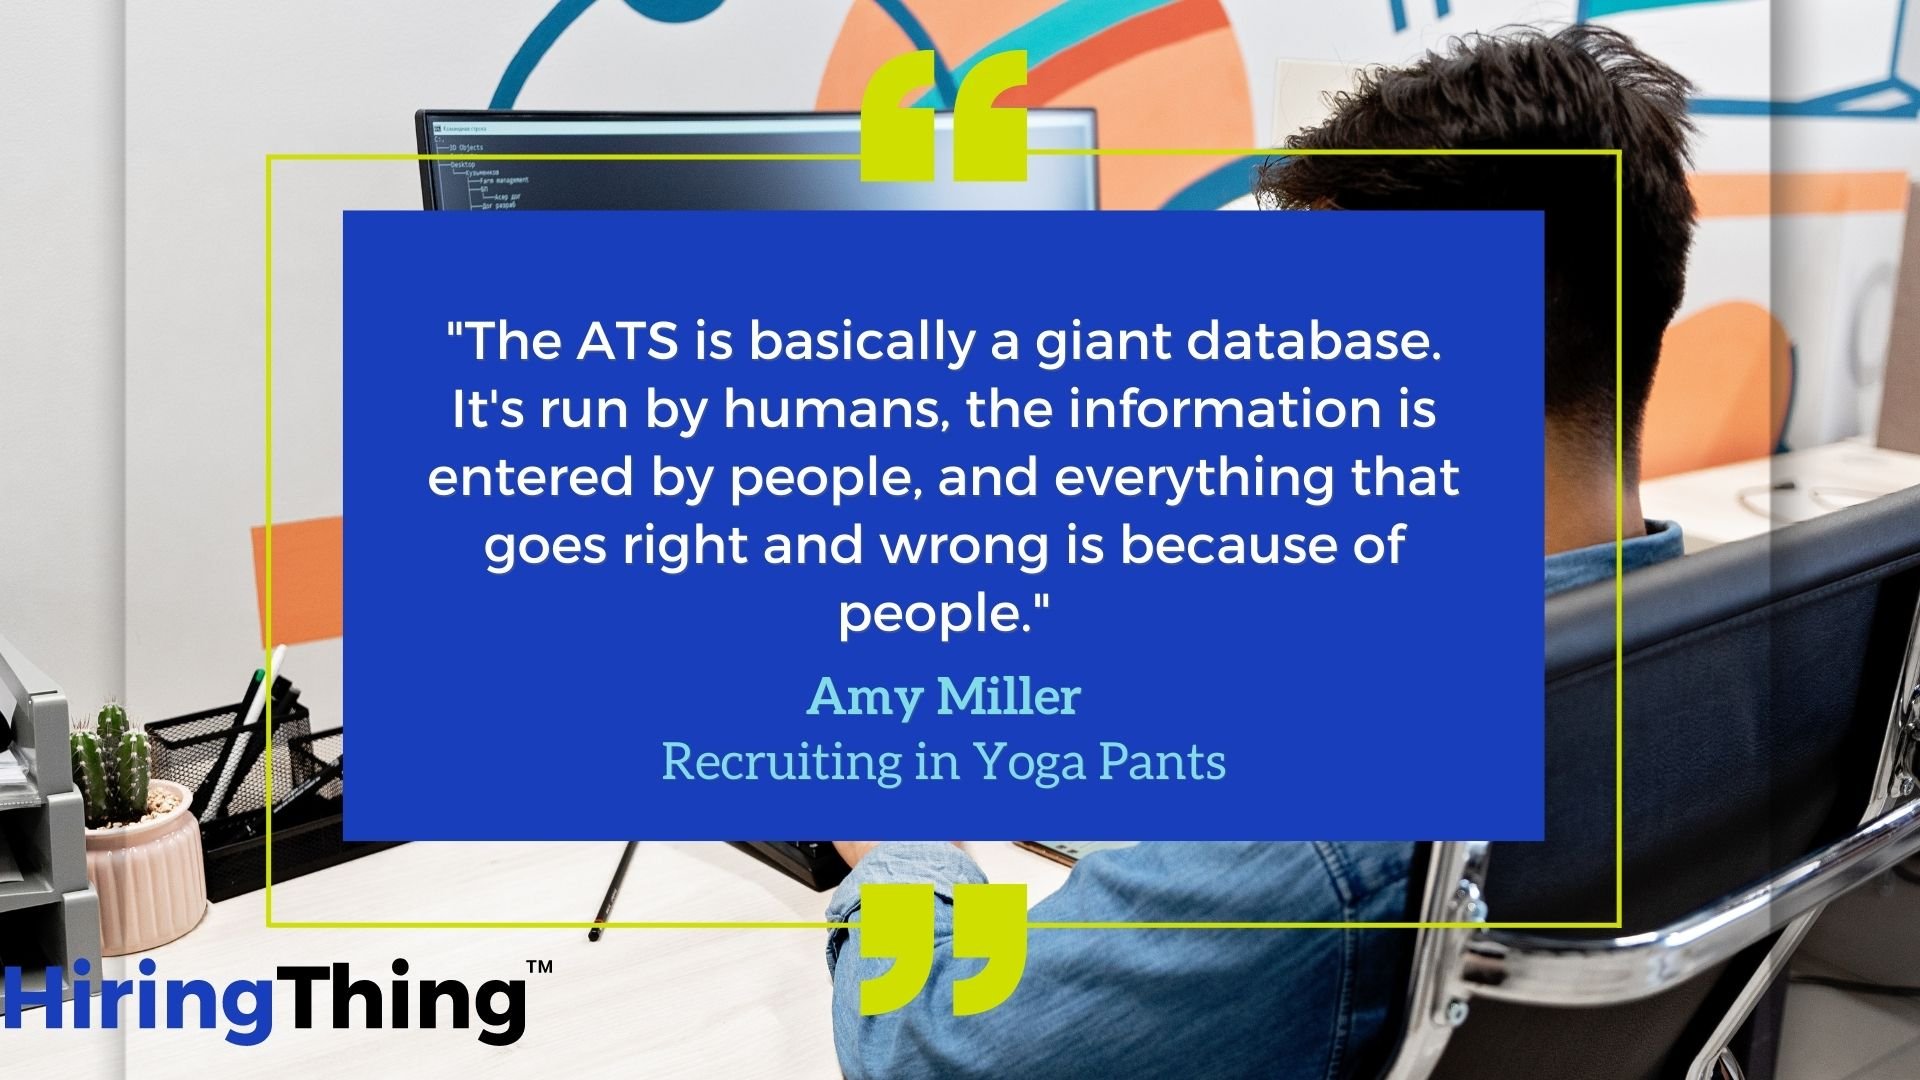 "The ATS is basically a giant database. It's run by humans, the information is entered by people, and everything that goes right and wrong is because of people.